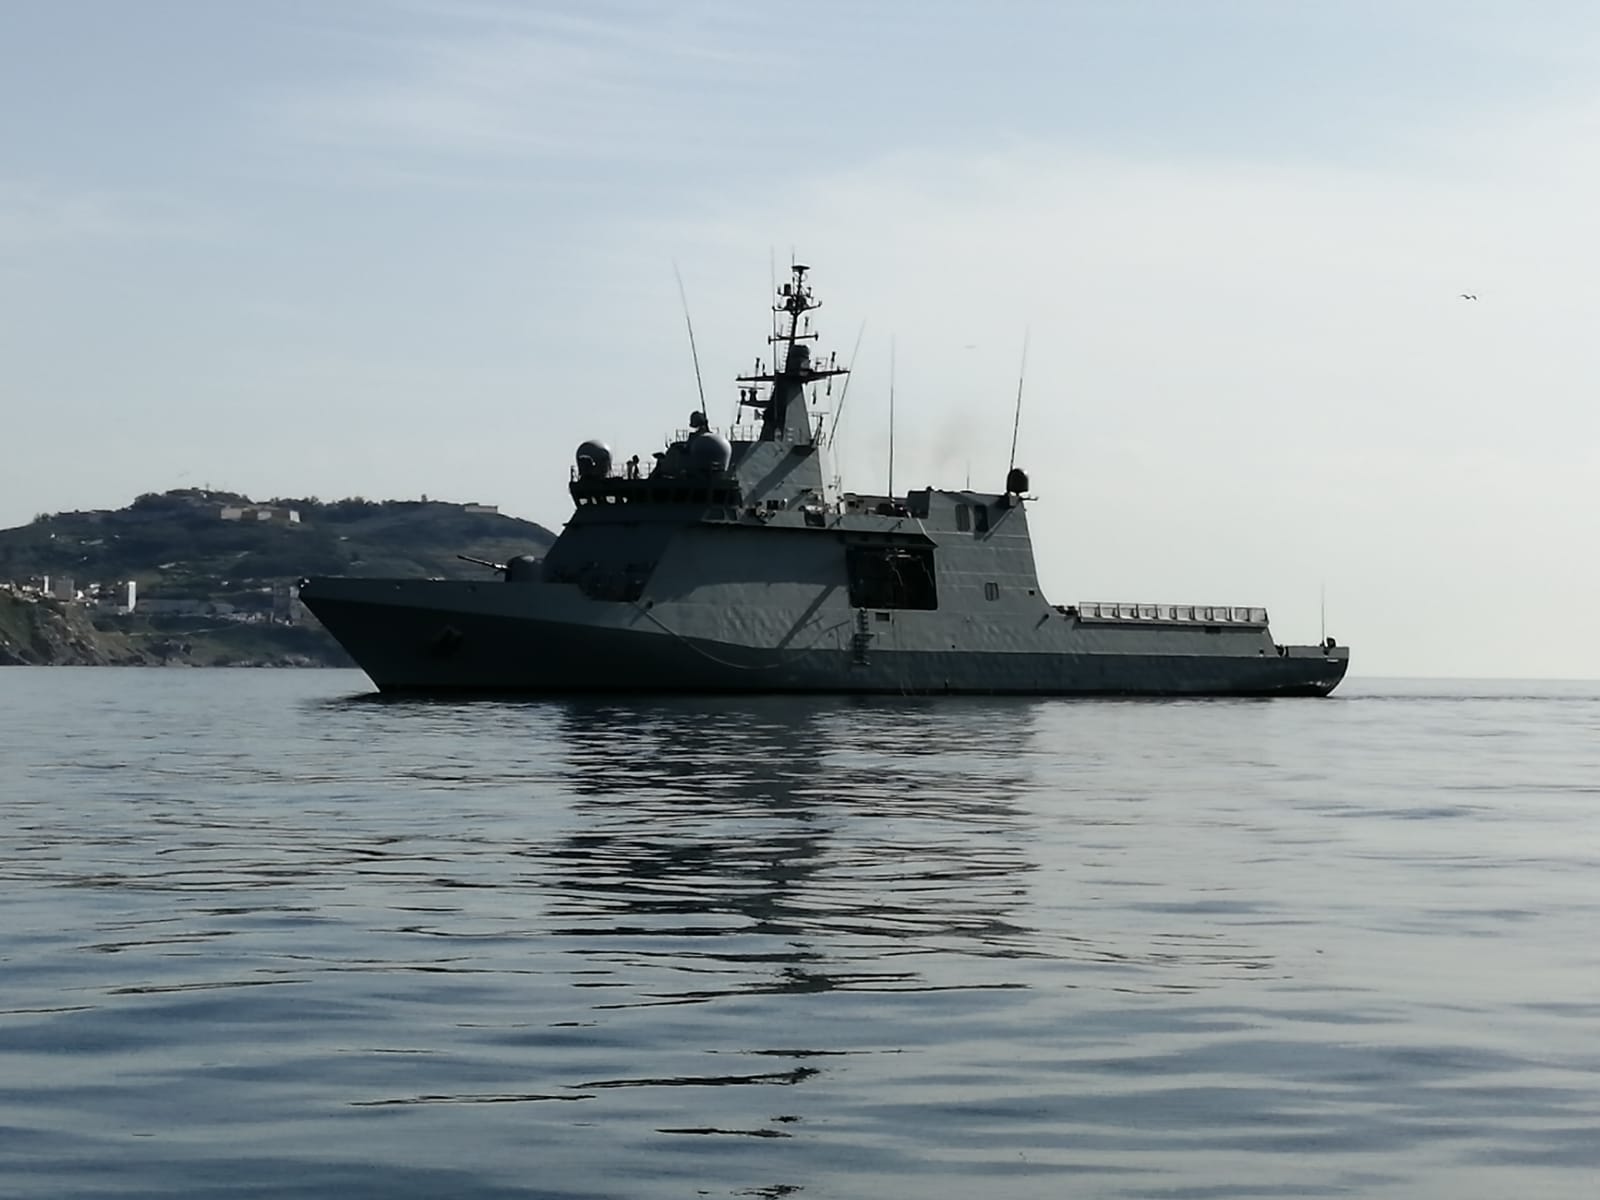 The ship 'Furor' joins the missions of surveillance and maritime security